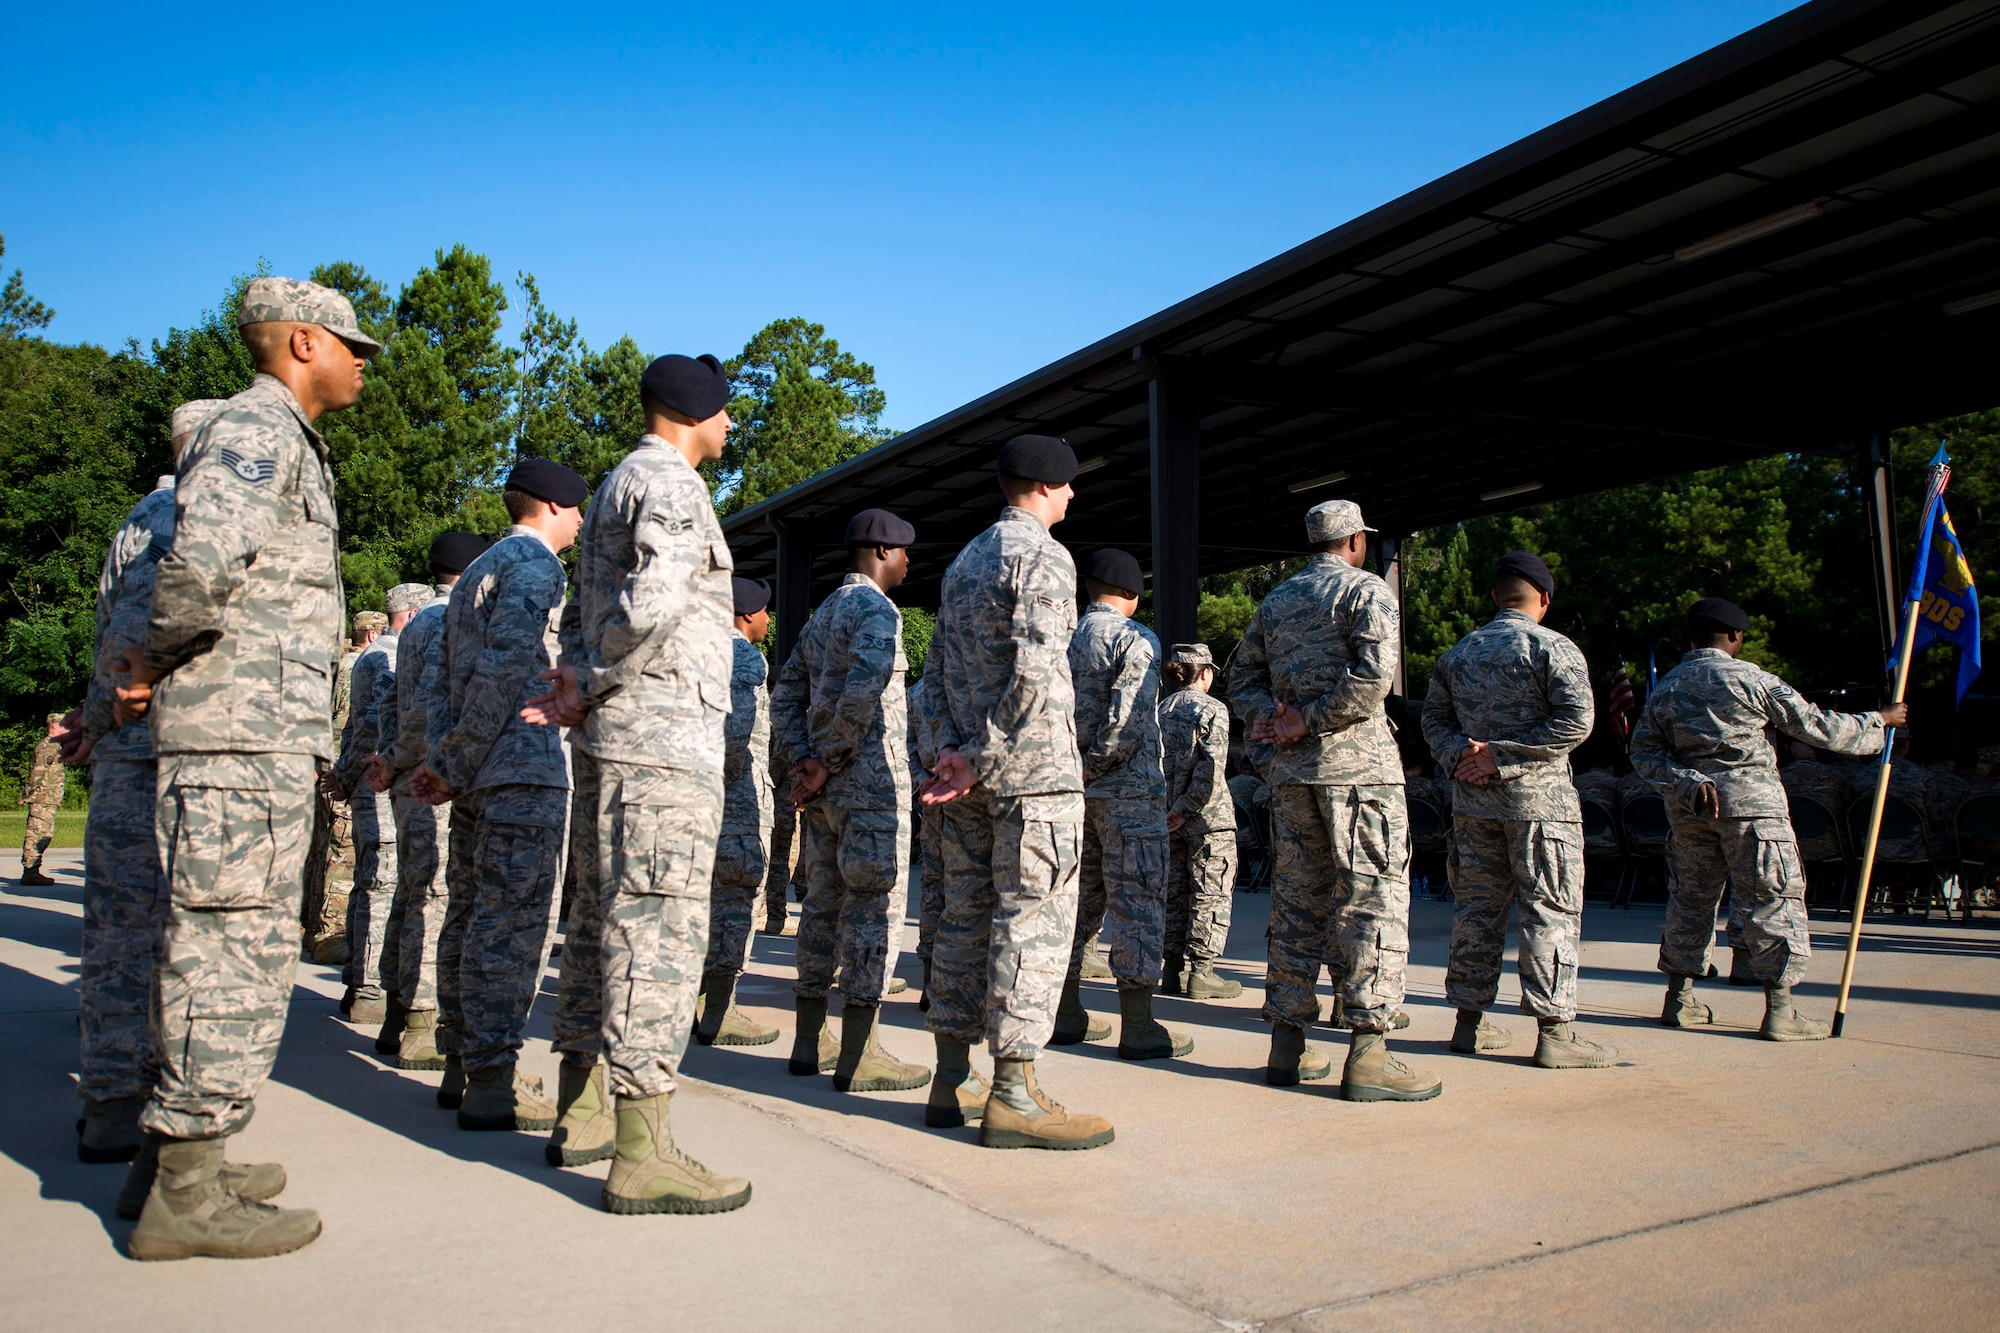 Airmen from the 820th Base Defense Group (BDG) stand at parade rest during a change of command ceremony, July 12, 2018, at Moody Air Force Base, Ga. The ceremony represents the formal passing of responsibility, authority and accountability of command from one officer to another. Col. Benito Barron, 820th BDG commander, who recently relinquished his duties as the Chief of the Homeland Defense and Protection Division for Headquarters United States Northern Command, will now command the 820th BDG. The 820th BDG is the Air Force’s only unit specifically designed to provide fully integrated defense operations. (U.S. Air Force photo by Airman 1st Class Erick Requadt)